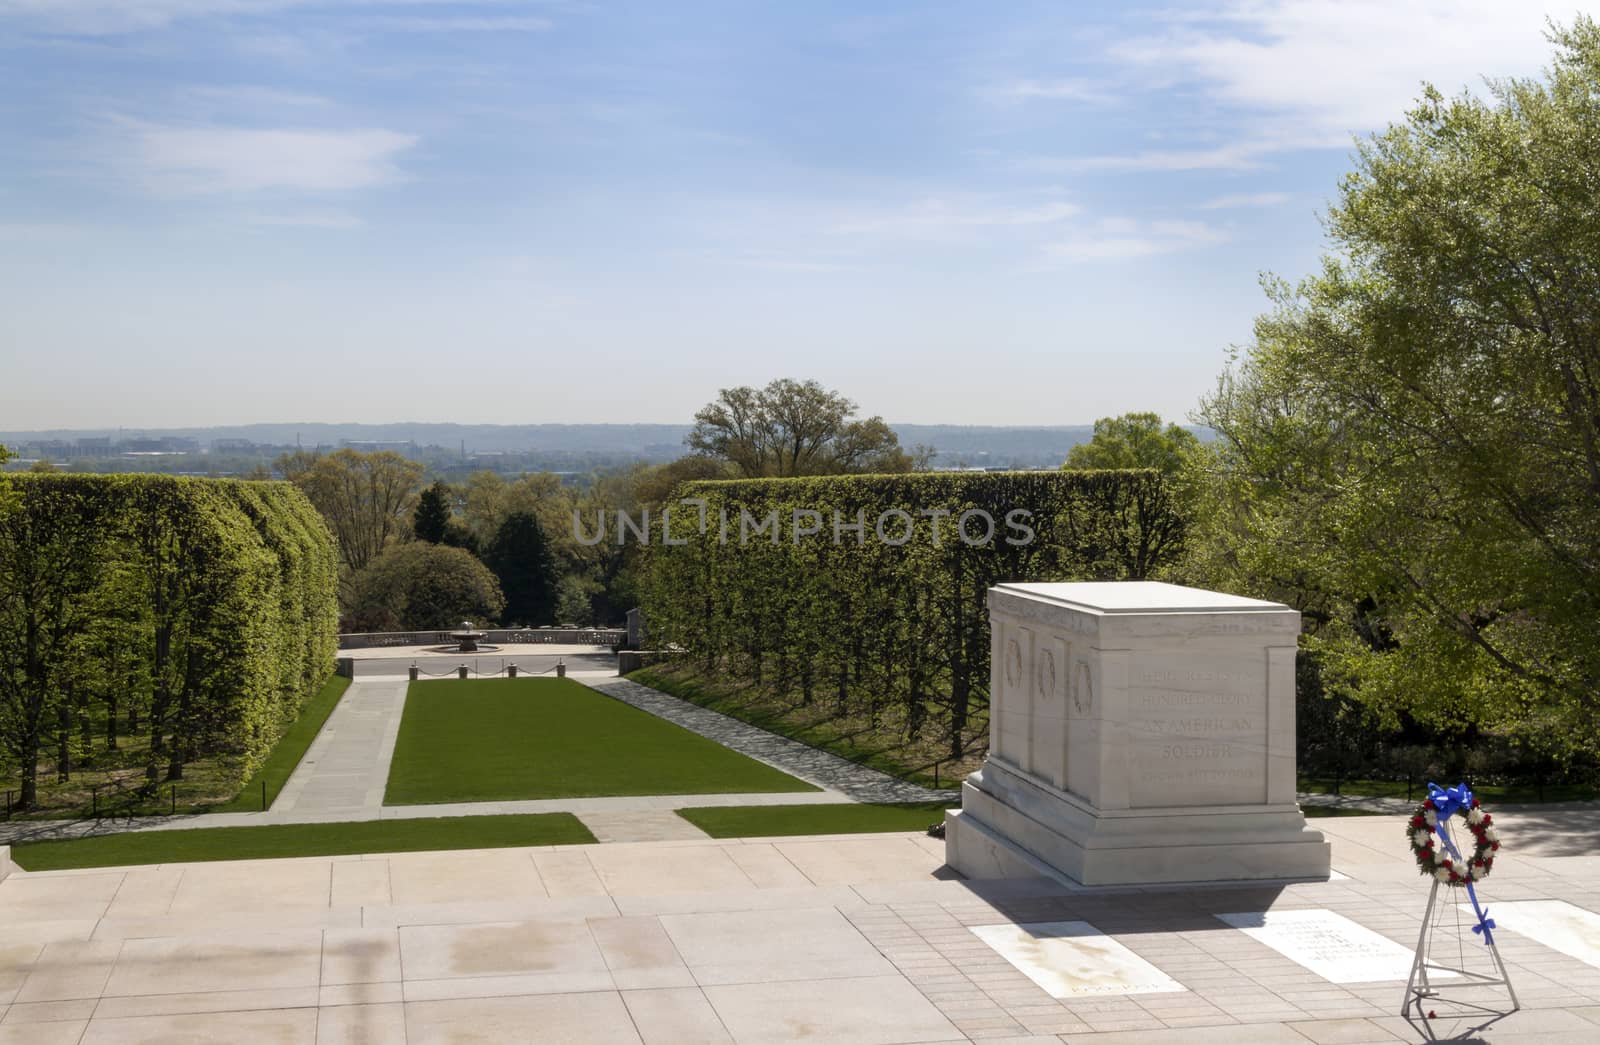 The tomb to unknown soldier in Arlington Cemetery in Virginia, USA